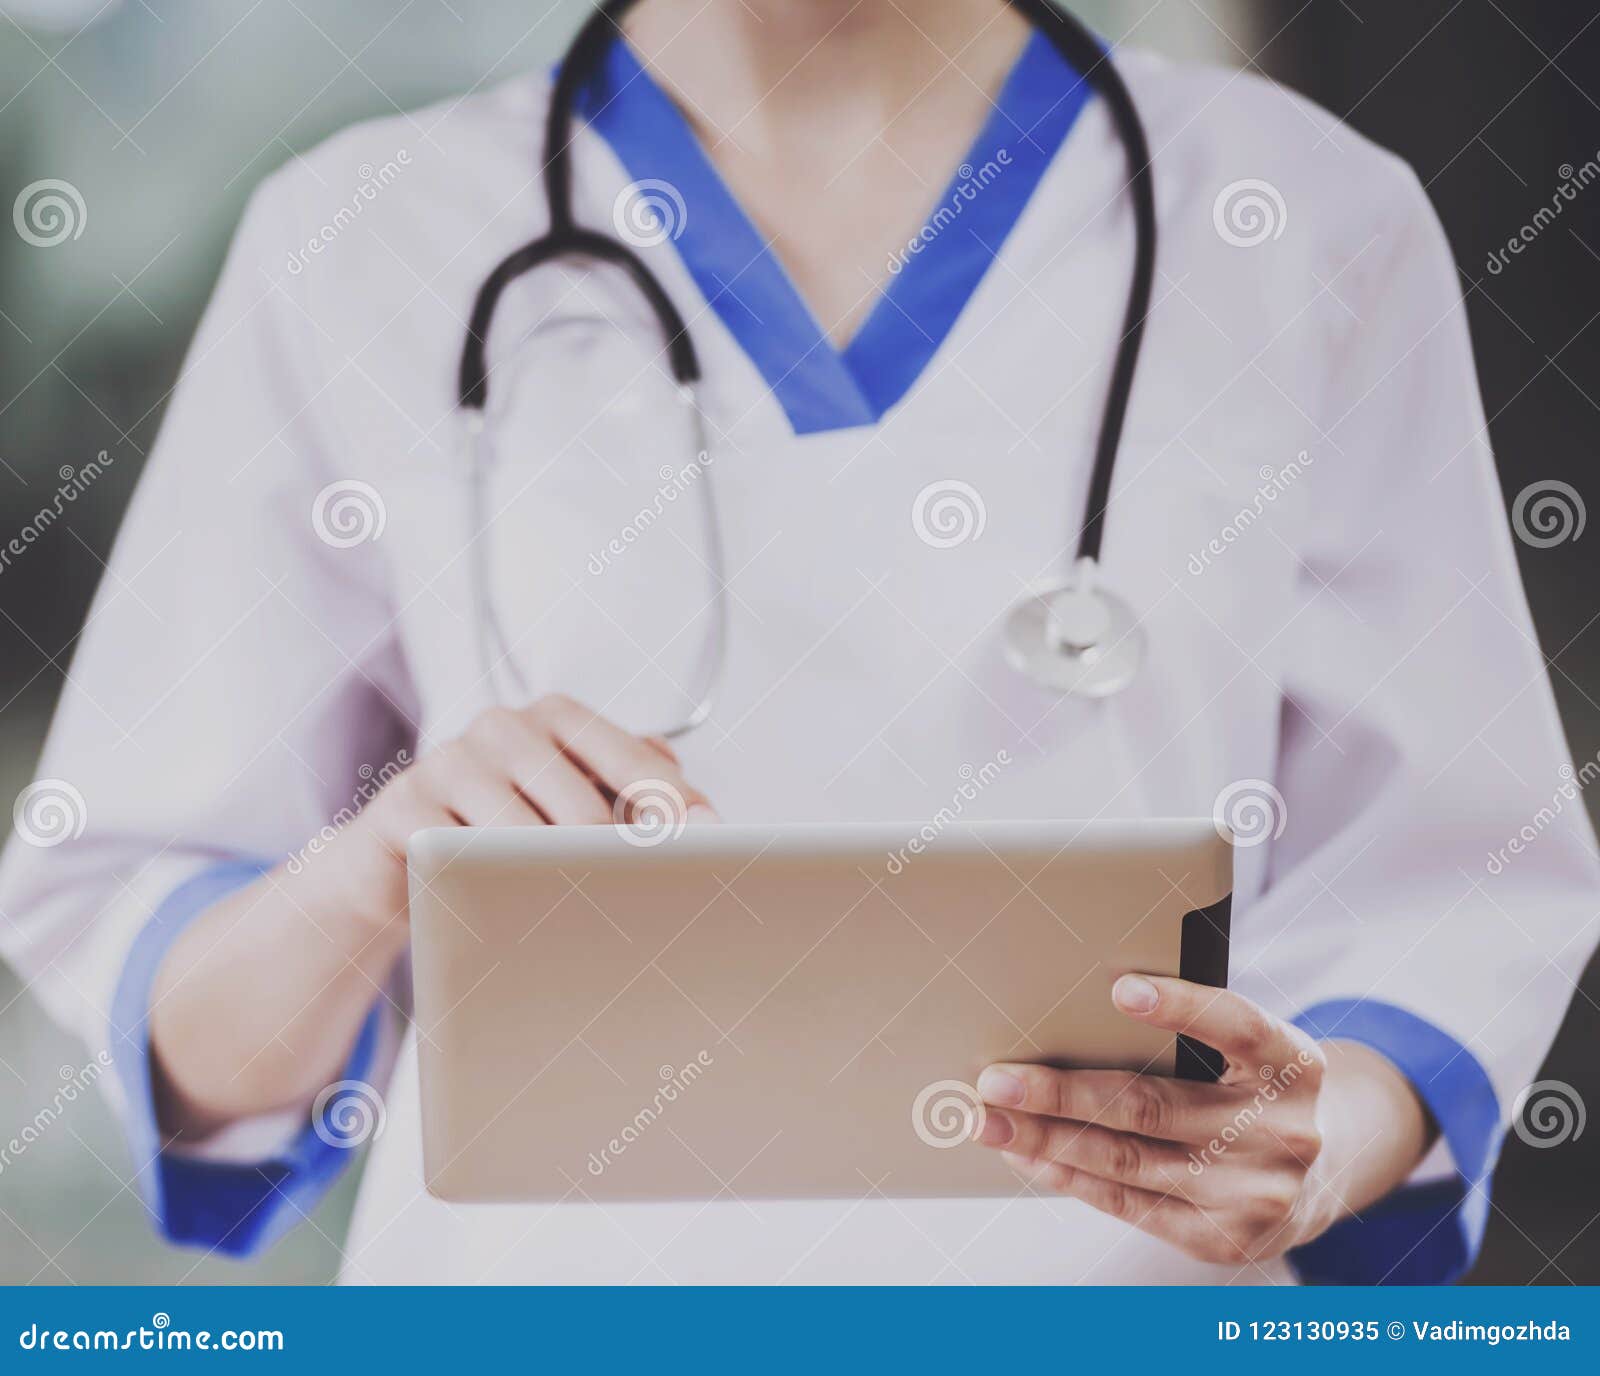 Young Doctor, Surgeon, Nurse With Stethoscope, Hands 